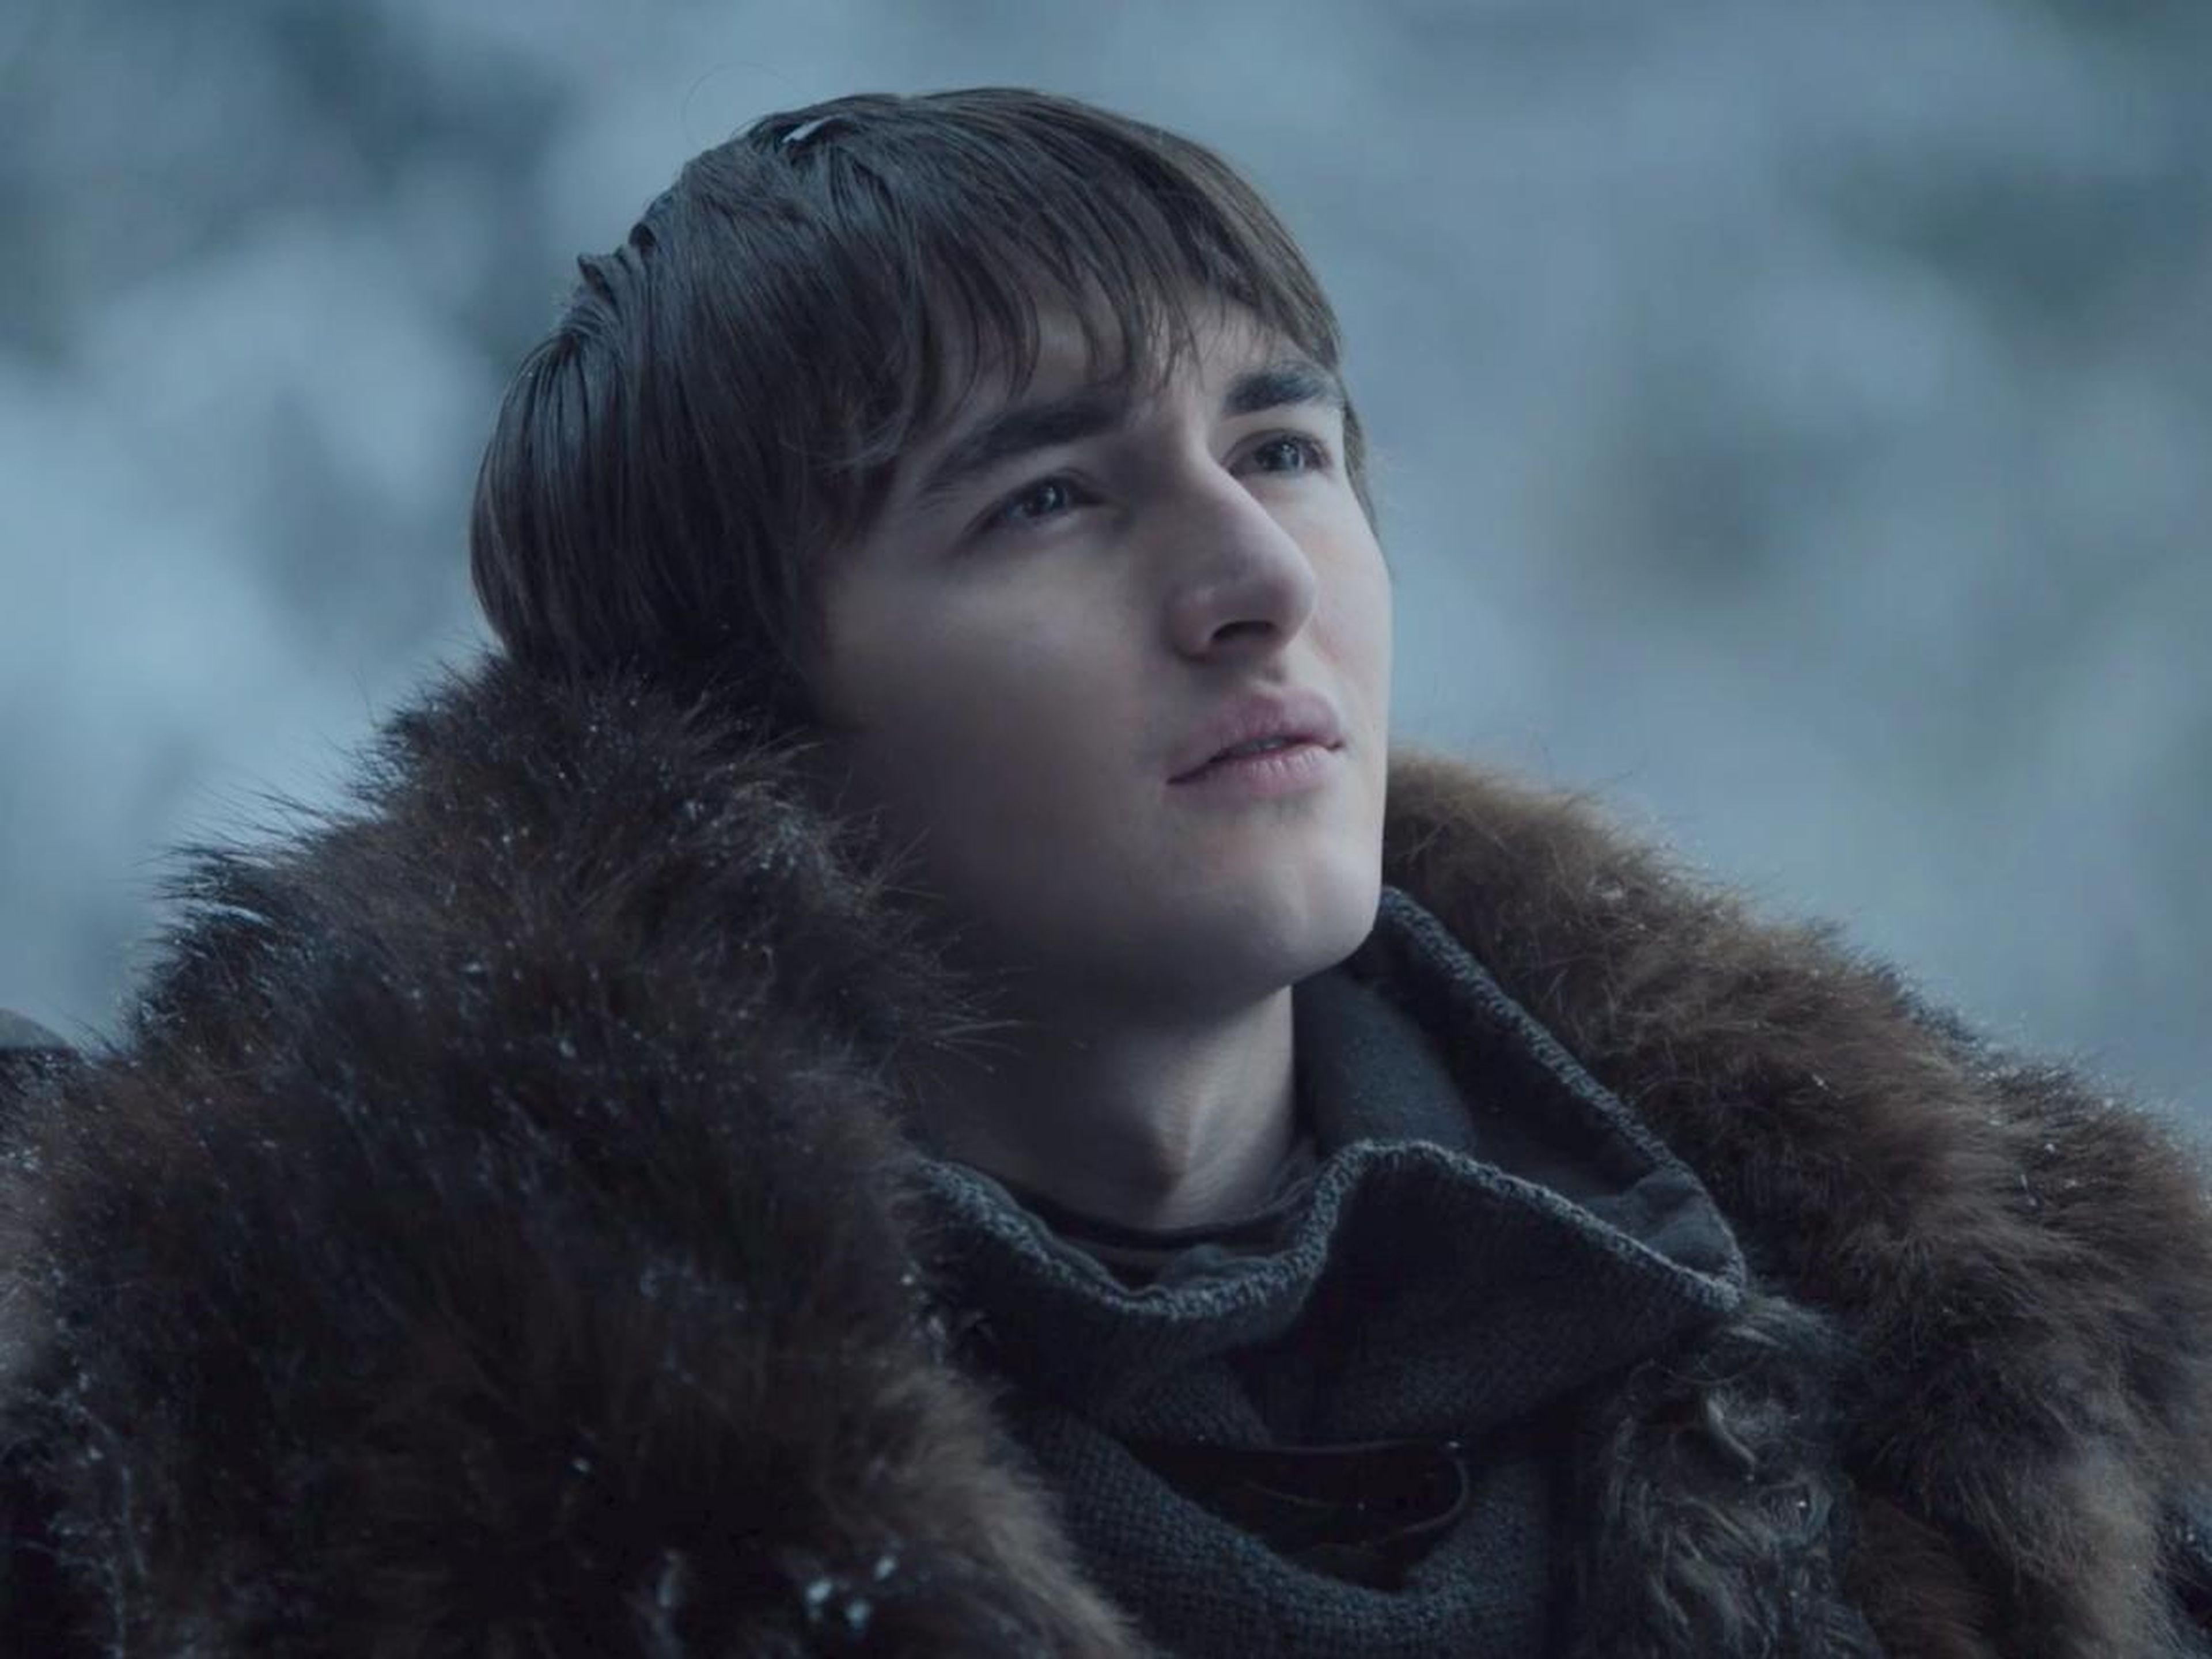 The Night King is after Bran.